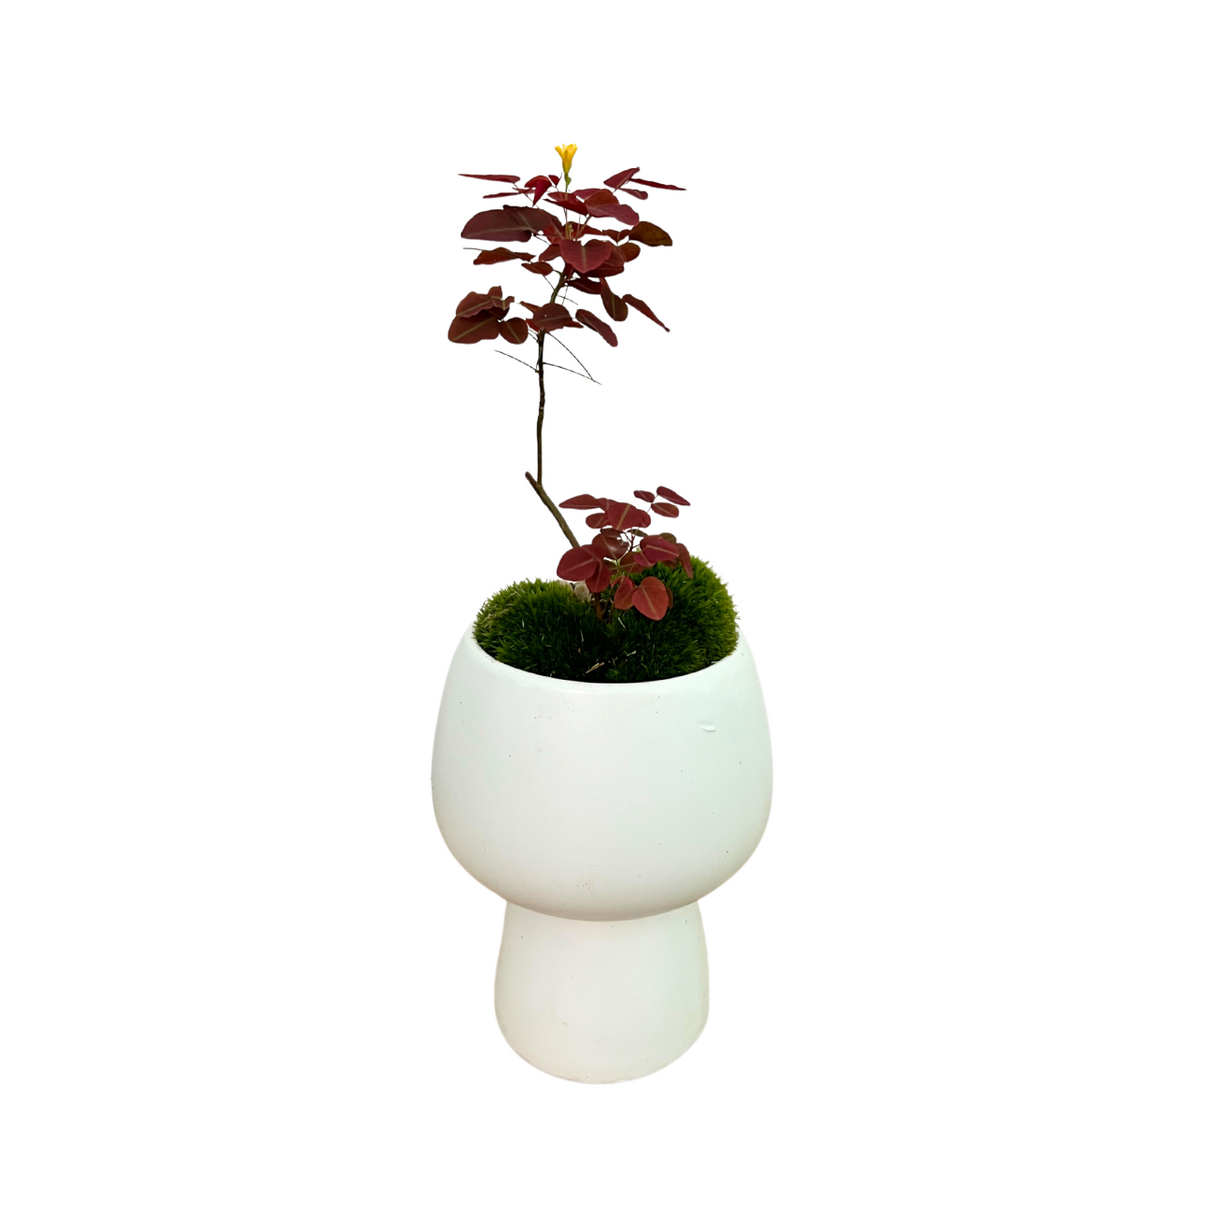 Fire Fern Oxalis Hedysaroides in White Ceramic Pot